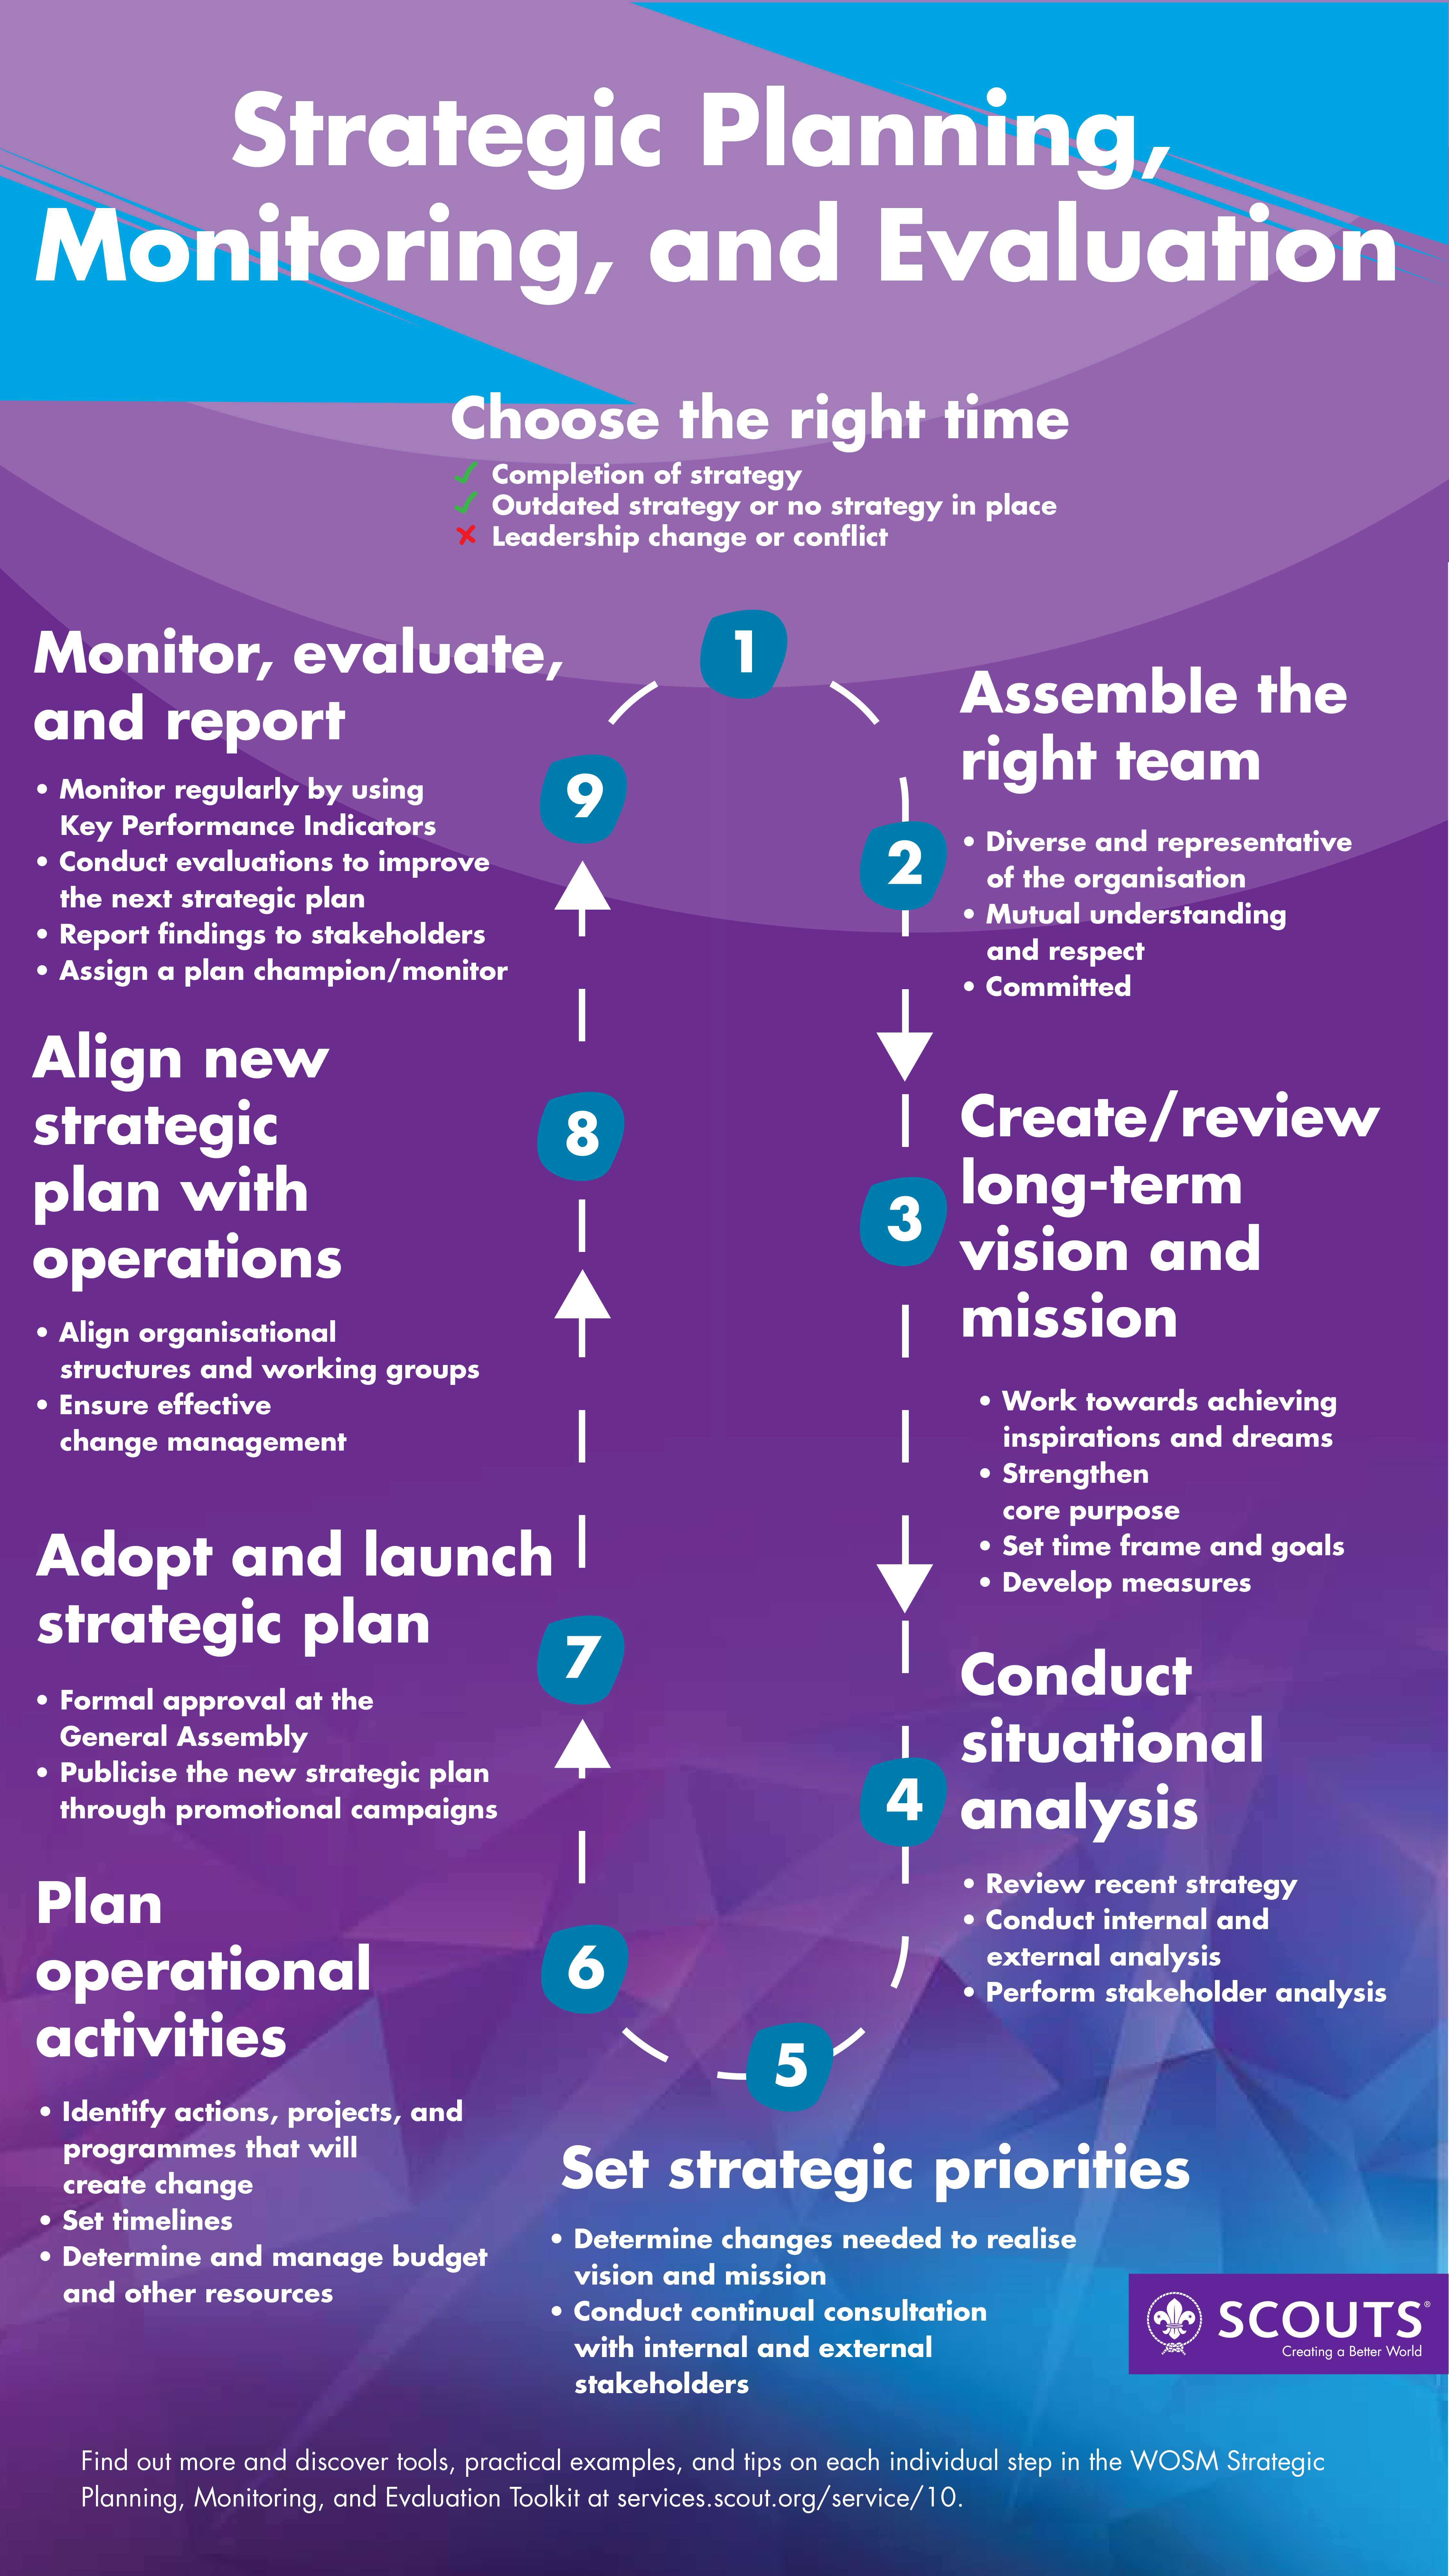 Management : A template for strategic planning. (Infographic)... - InfographicNow.com | Your ...